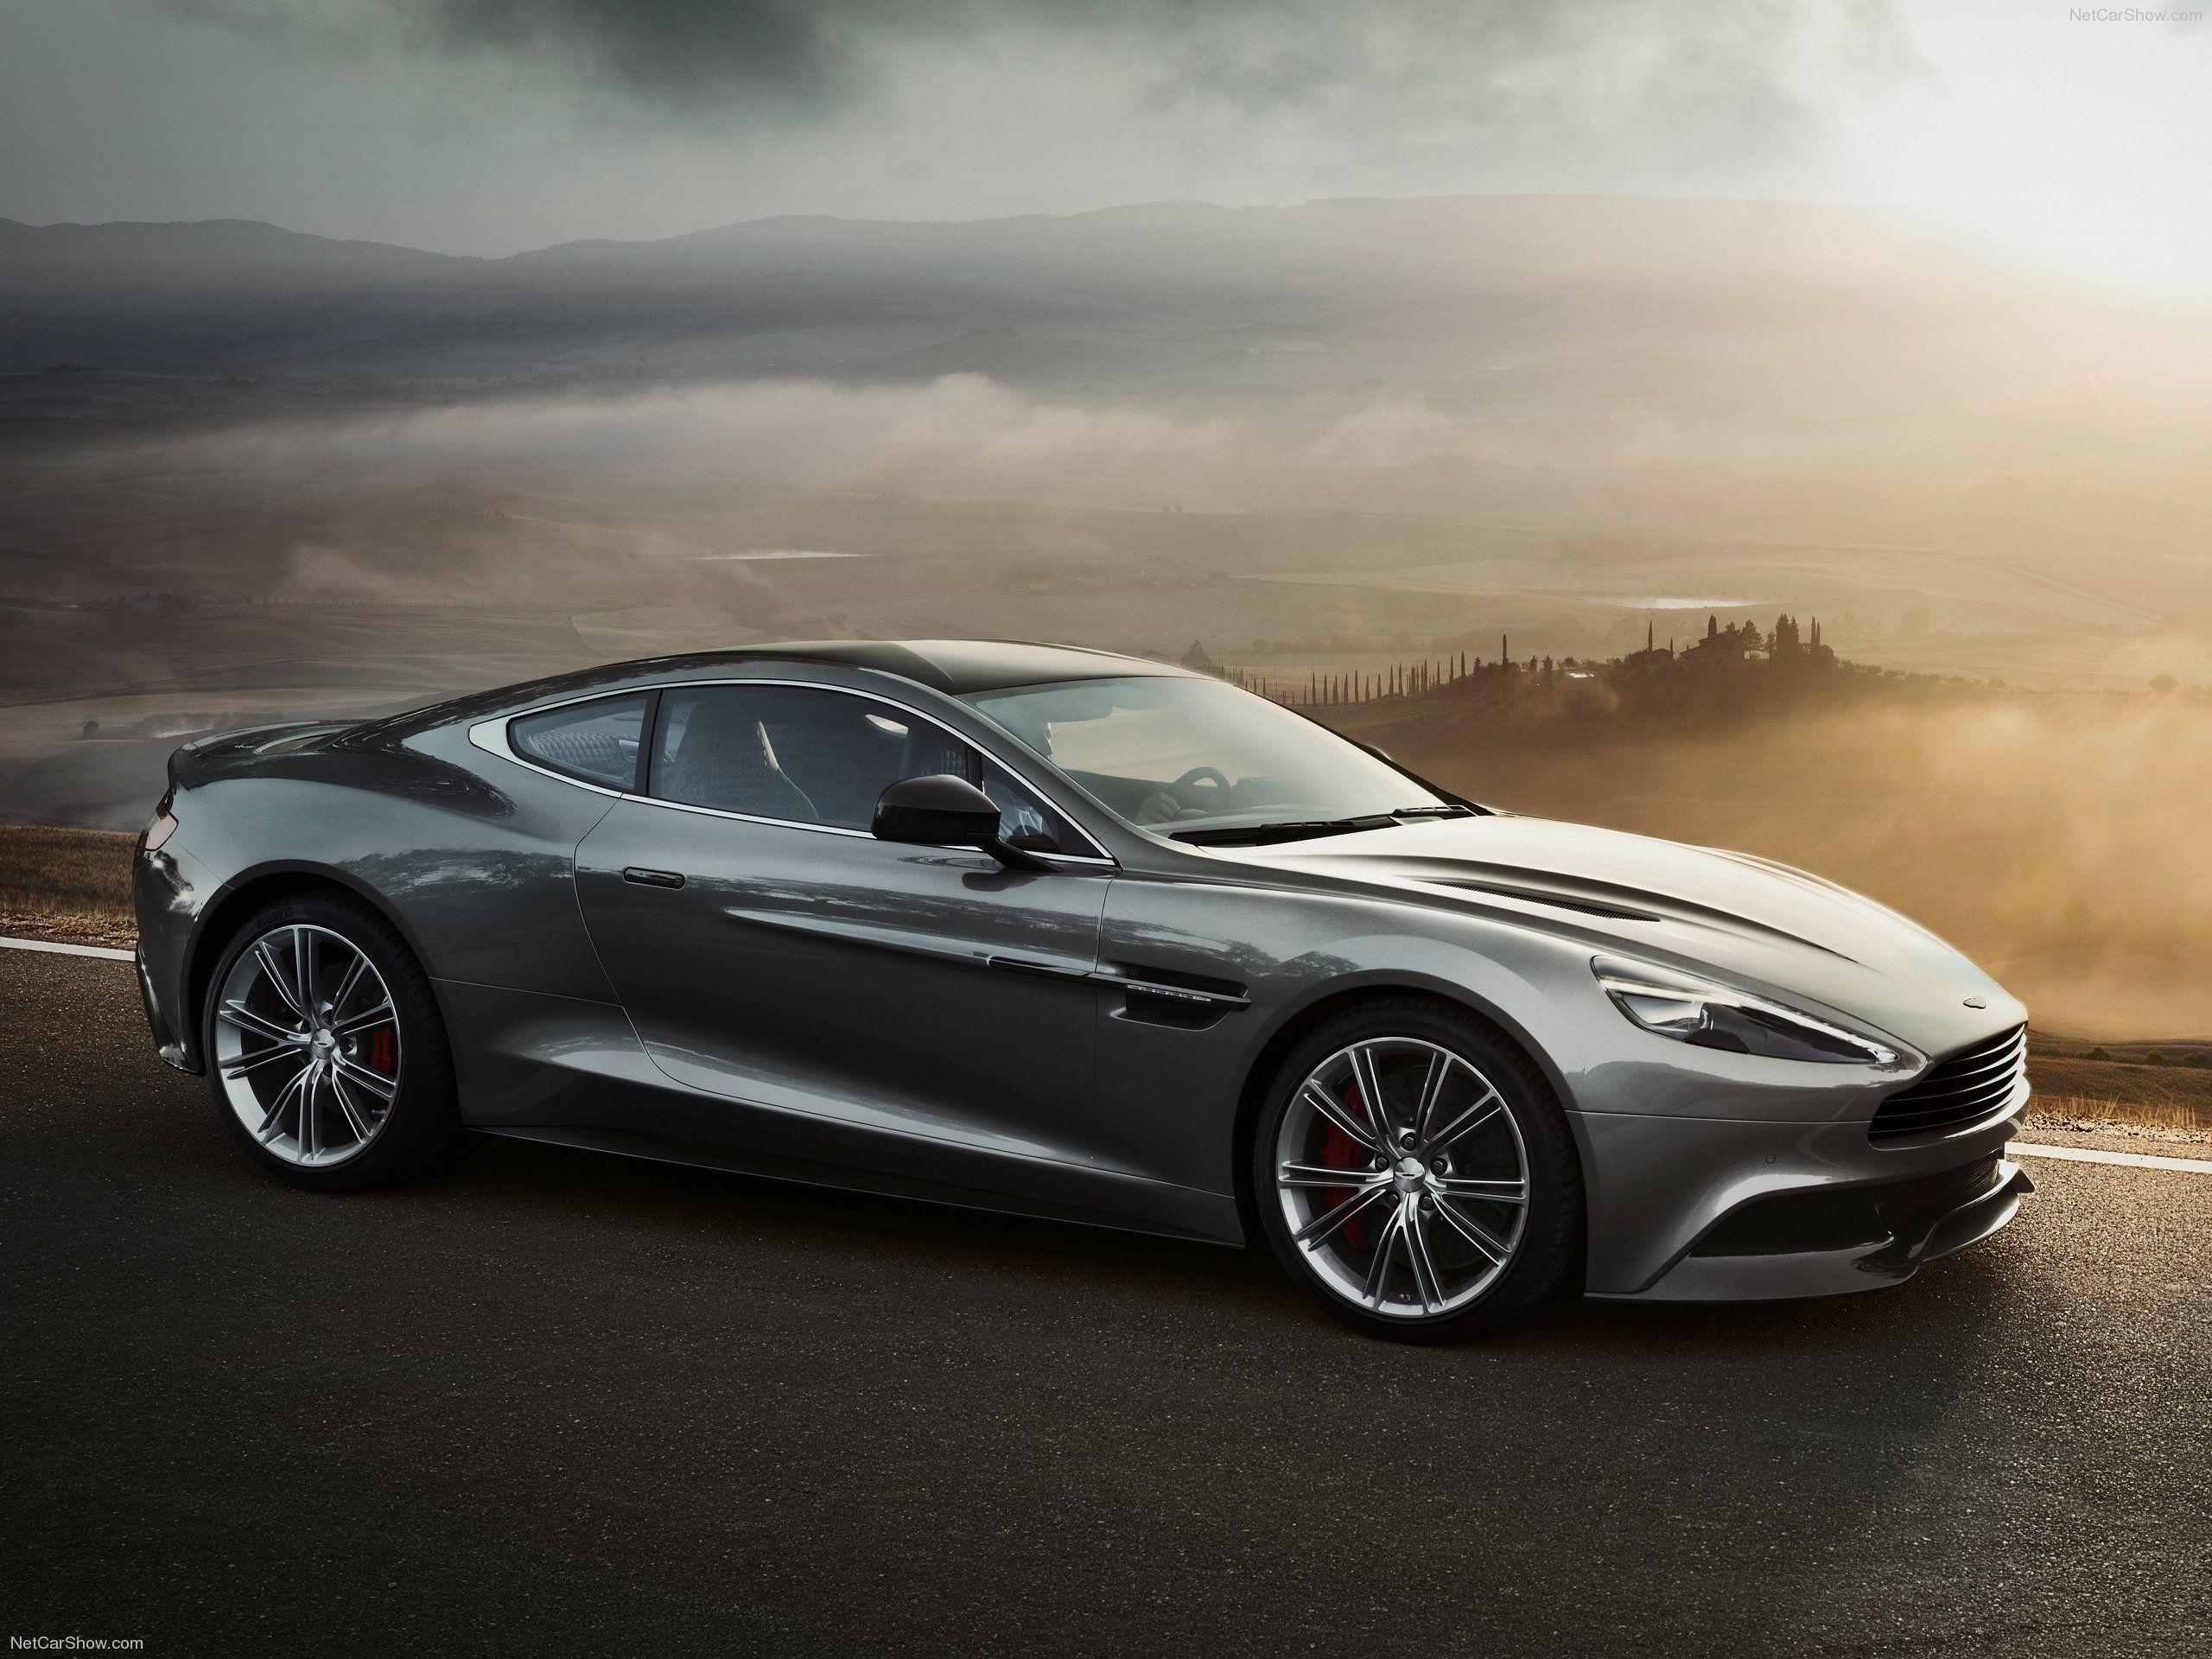 Nothing found for Aston Martin Vanquish Image Cool Car Wallpaper